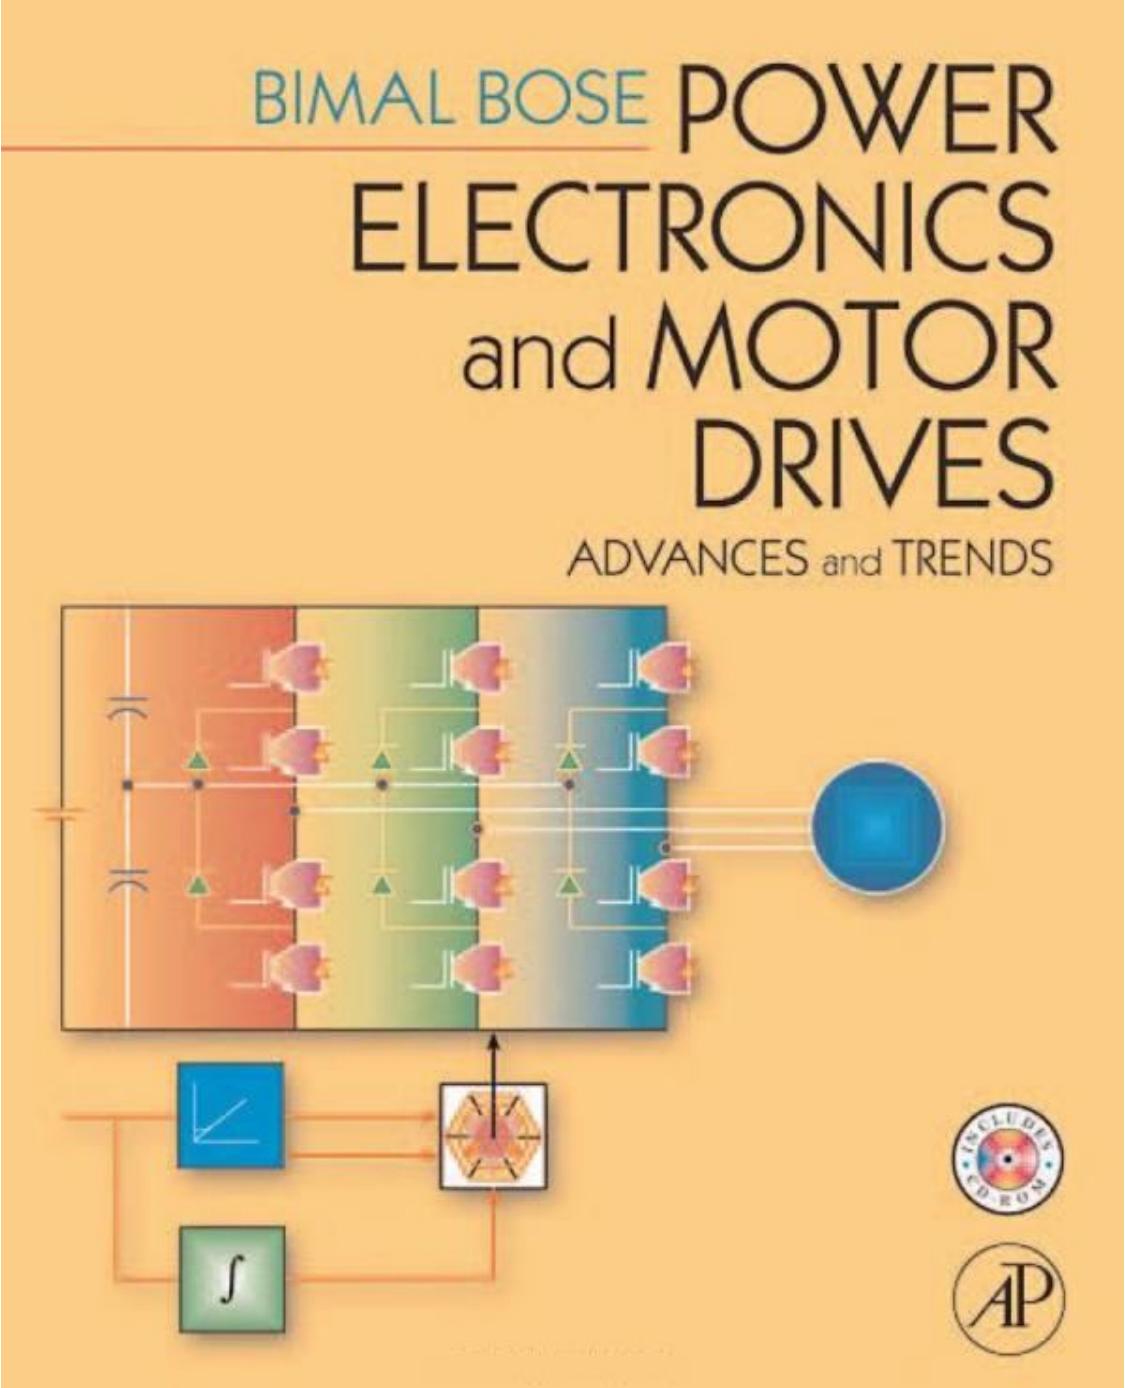 Power Electronics and Motor Drives by Power Electronics & Motor Drives Advances & Trends (2006)